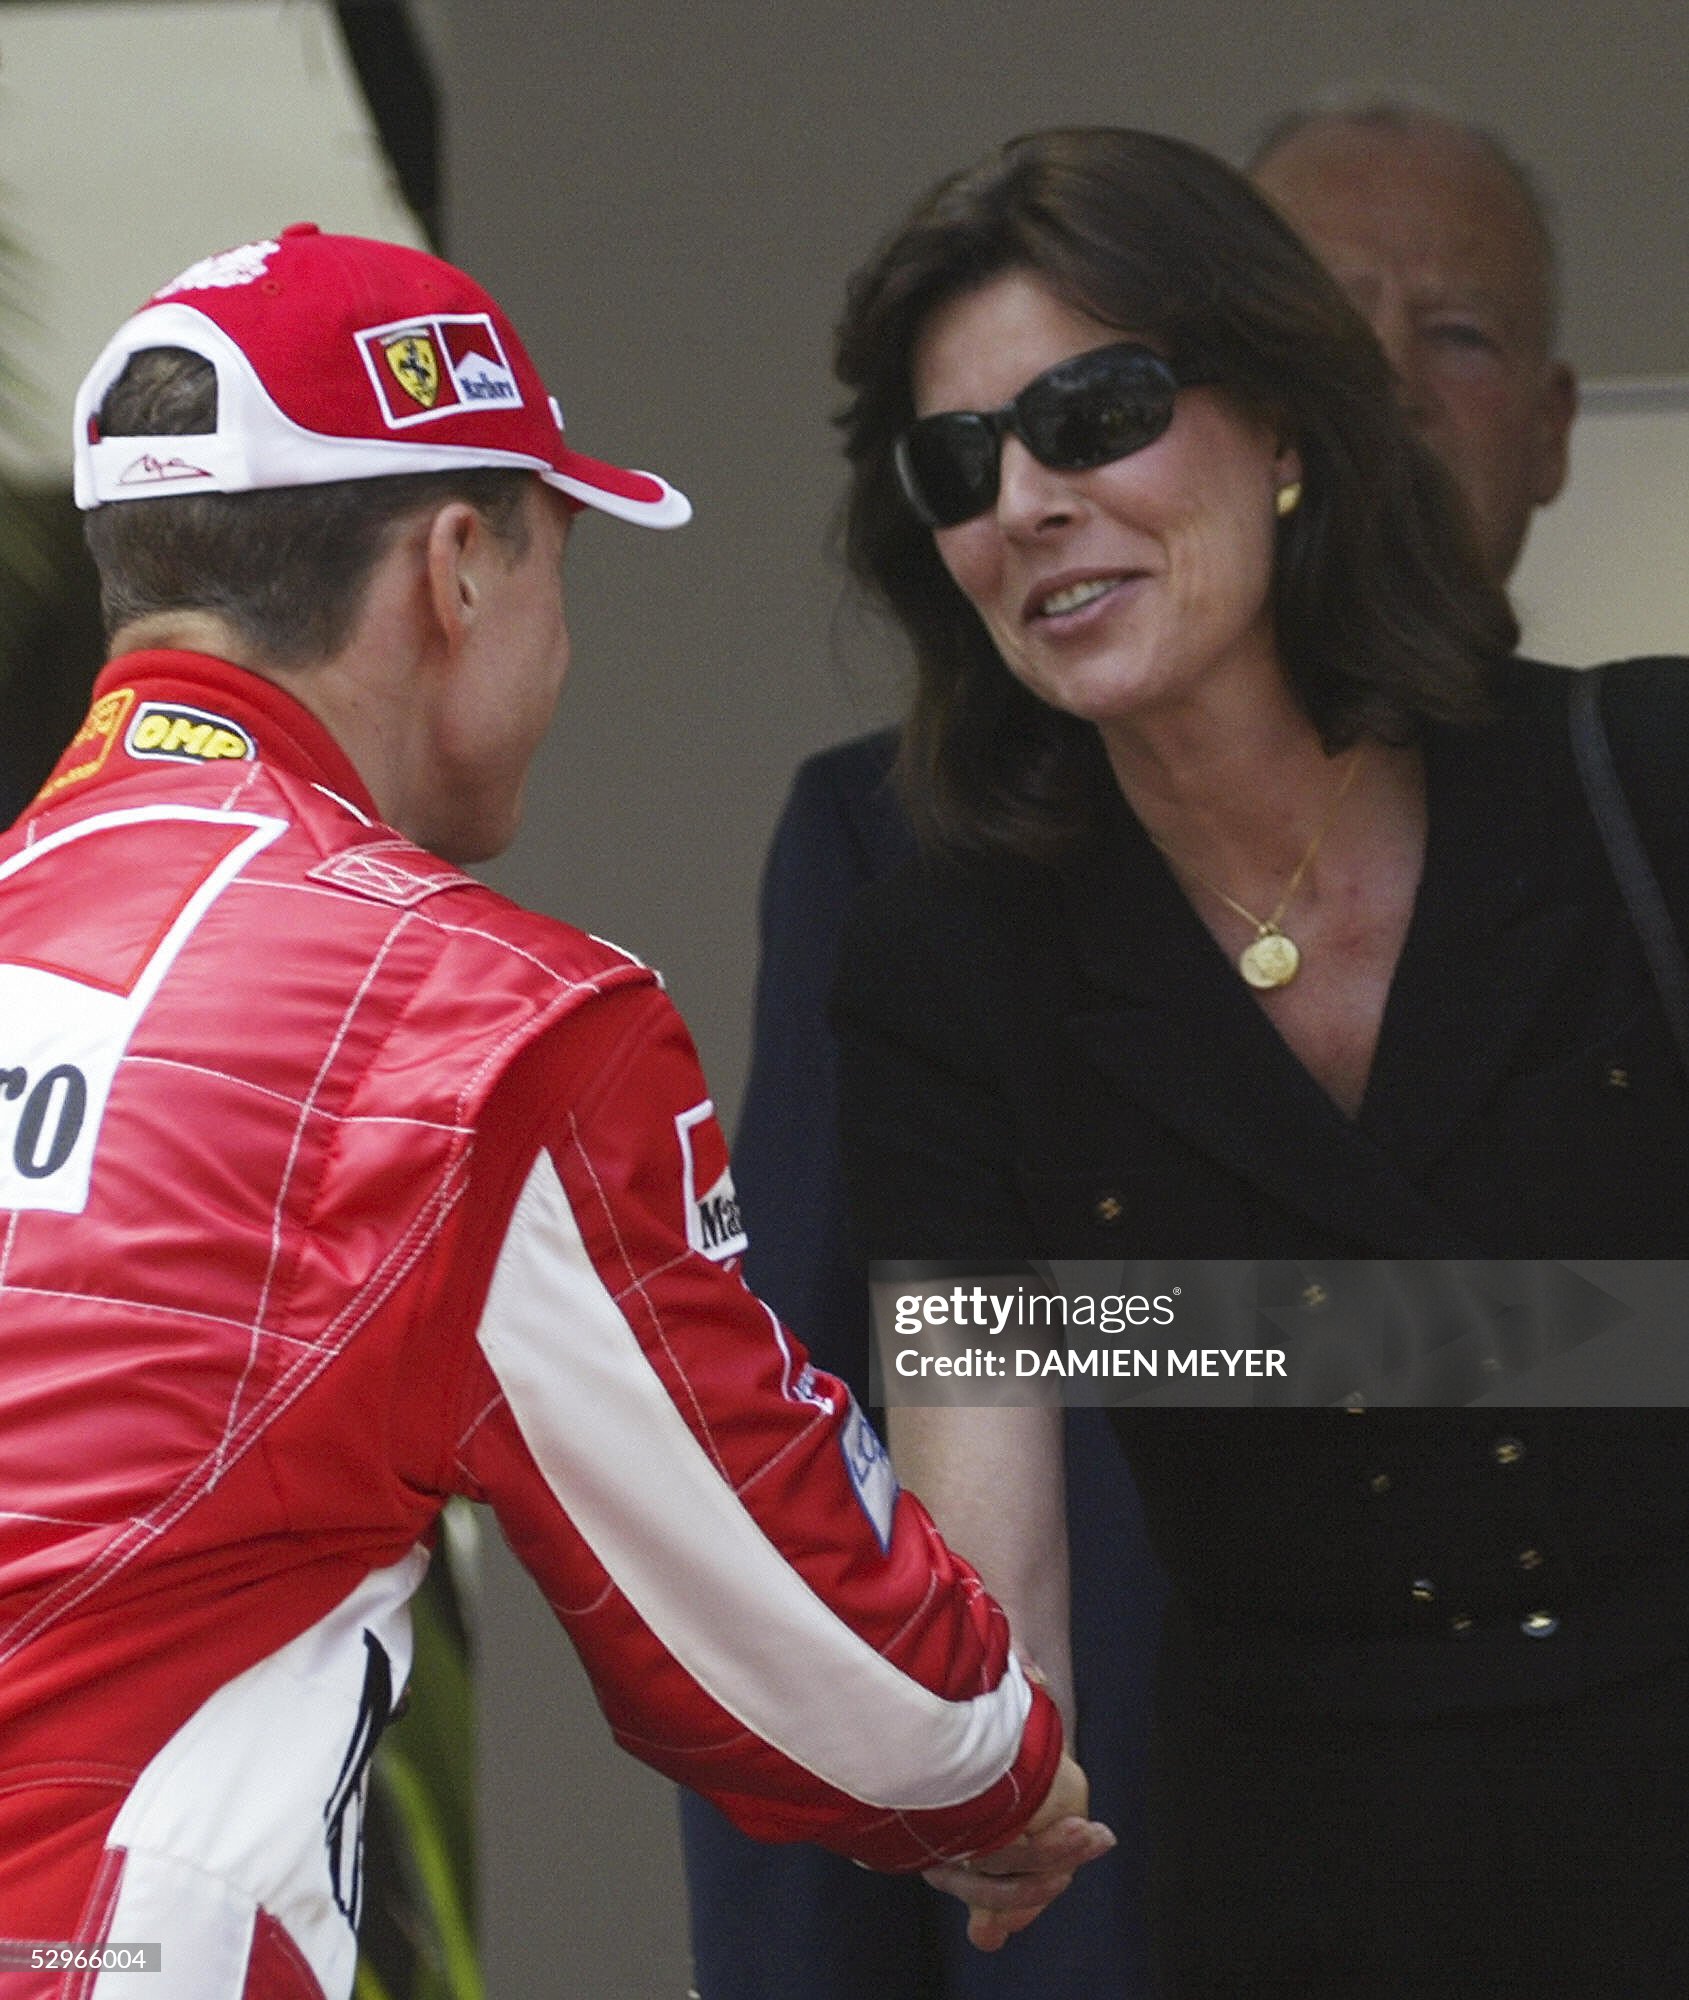 Princess Caroline of Monaco shakes hand with Ferrari German driver Michael Schumacher after a minute of silence in memory of Prince Rainier III, on the start grid of the Monaco racetrack before the start of the Monaco Grand Prix on 22 May 2005. 